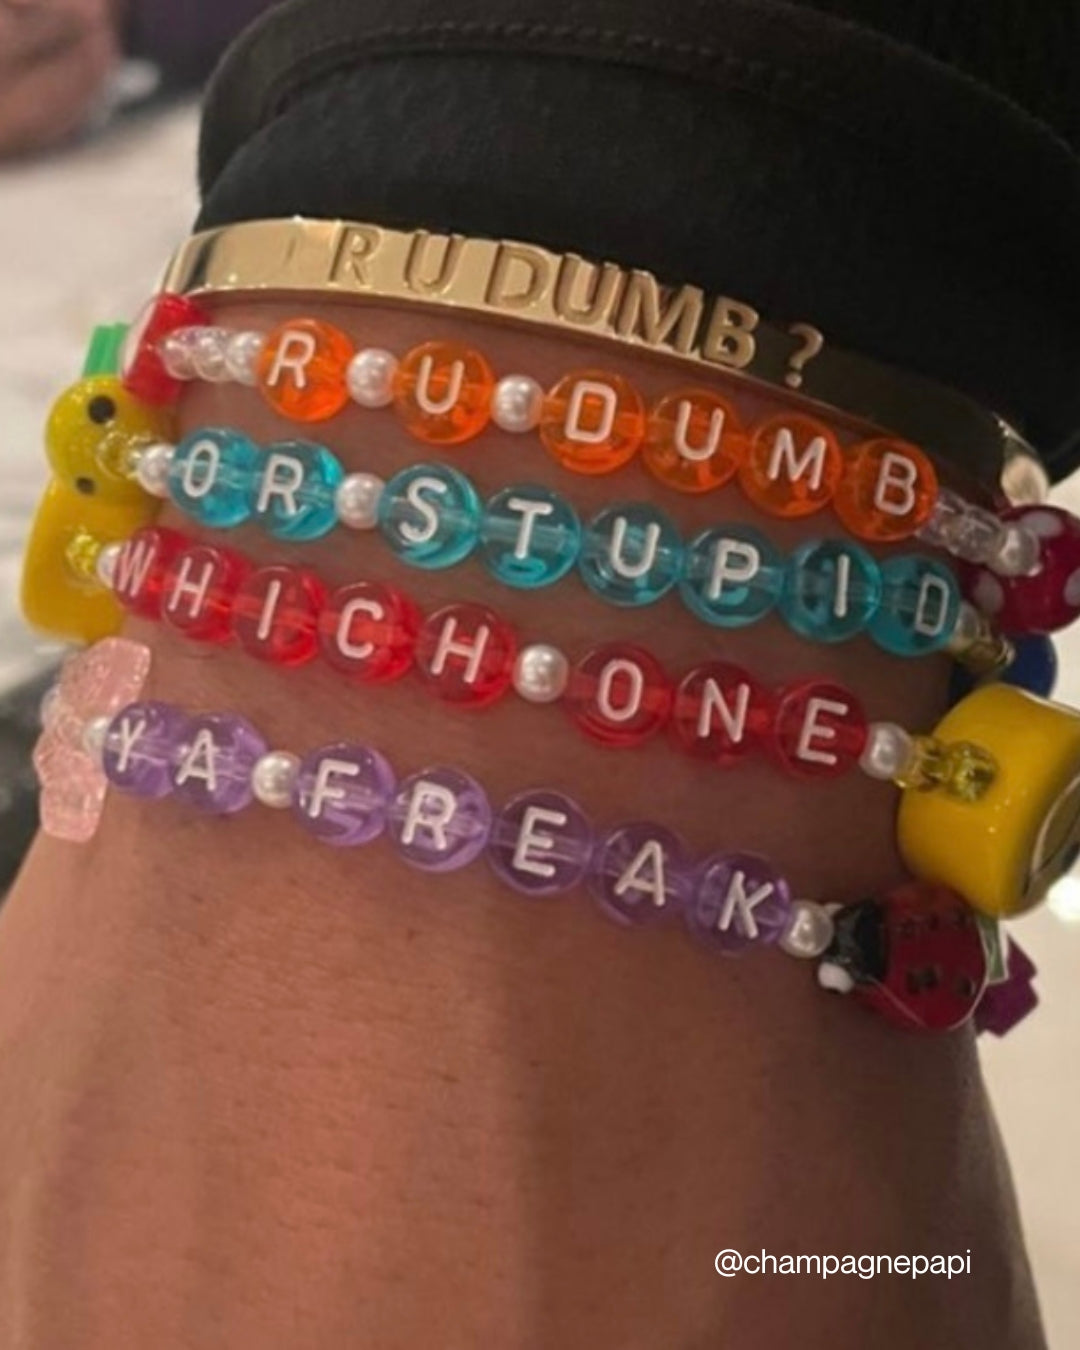 A close up of Buttercup Studio's Aubrey Set on Drake's wrist. A gold curved bracelet band carved with the phrase R U DUMB? with the Drake Custom Bracelet set in orange beads spelling out R U DUMB? below it, and a Drake custom bracelet set in teal beads spelling out OR STUPID below that, and a Drake Custom Bracelet in red beads spelling out WHICH ONE under it, and a Drake Custom Bracelet set in purple beads spelling out YA FREAK at the bottom. Image credits: @champagnepapi on Instagram.